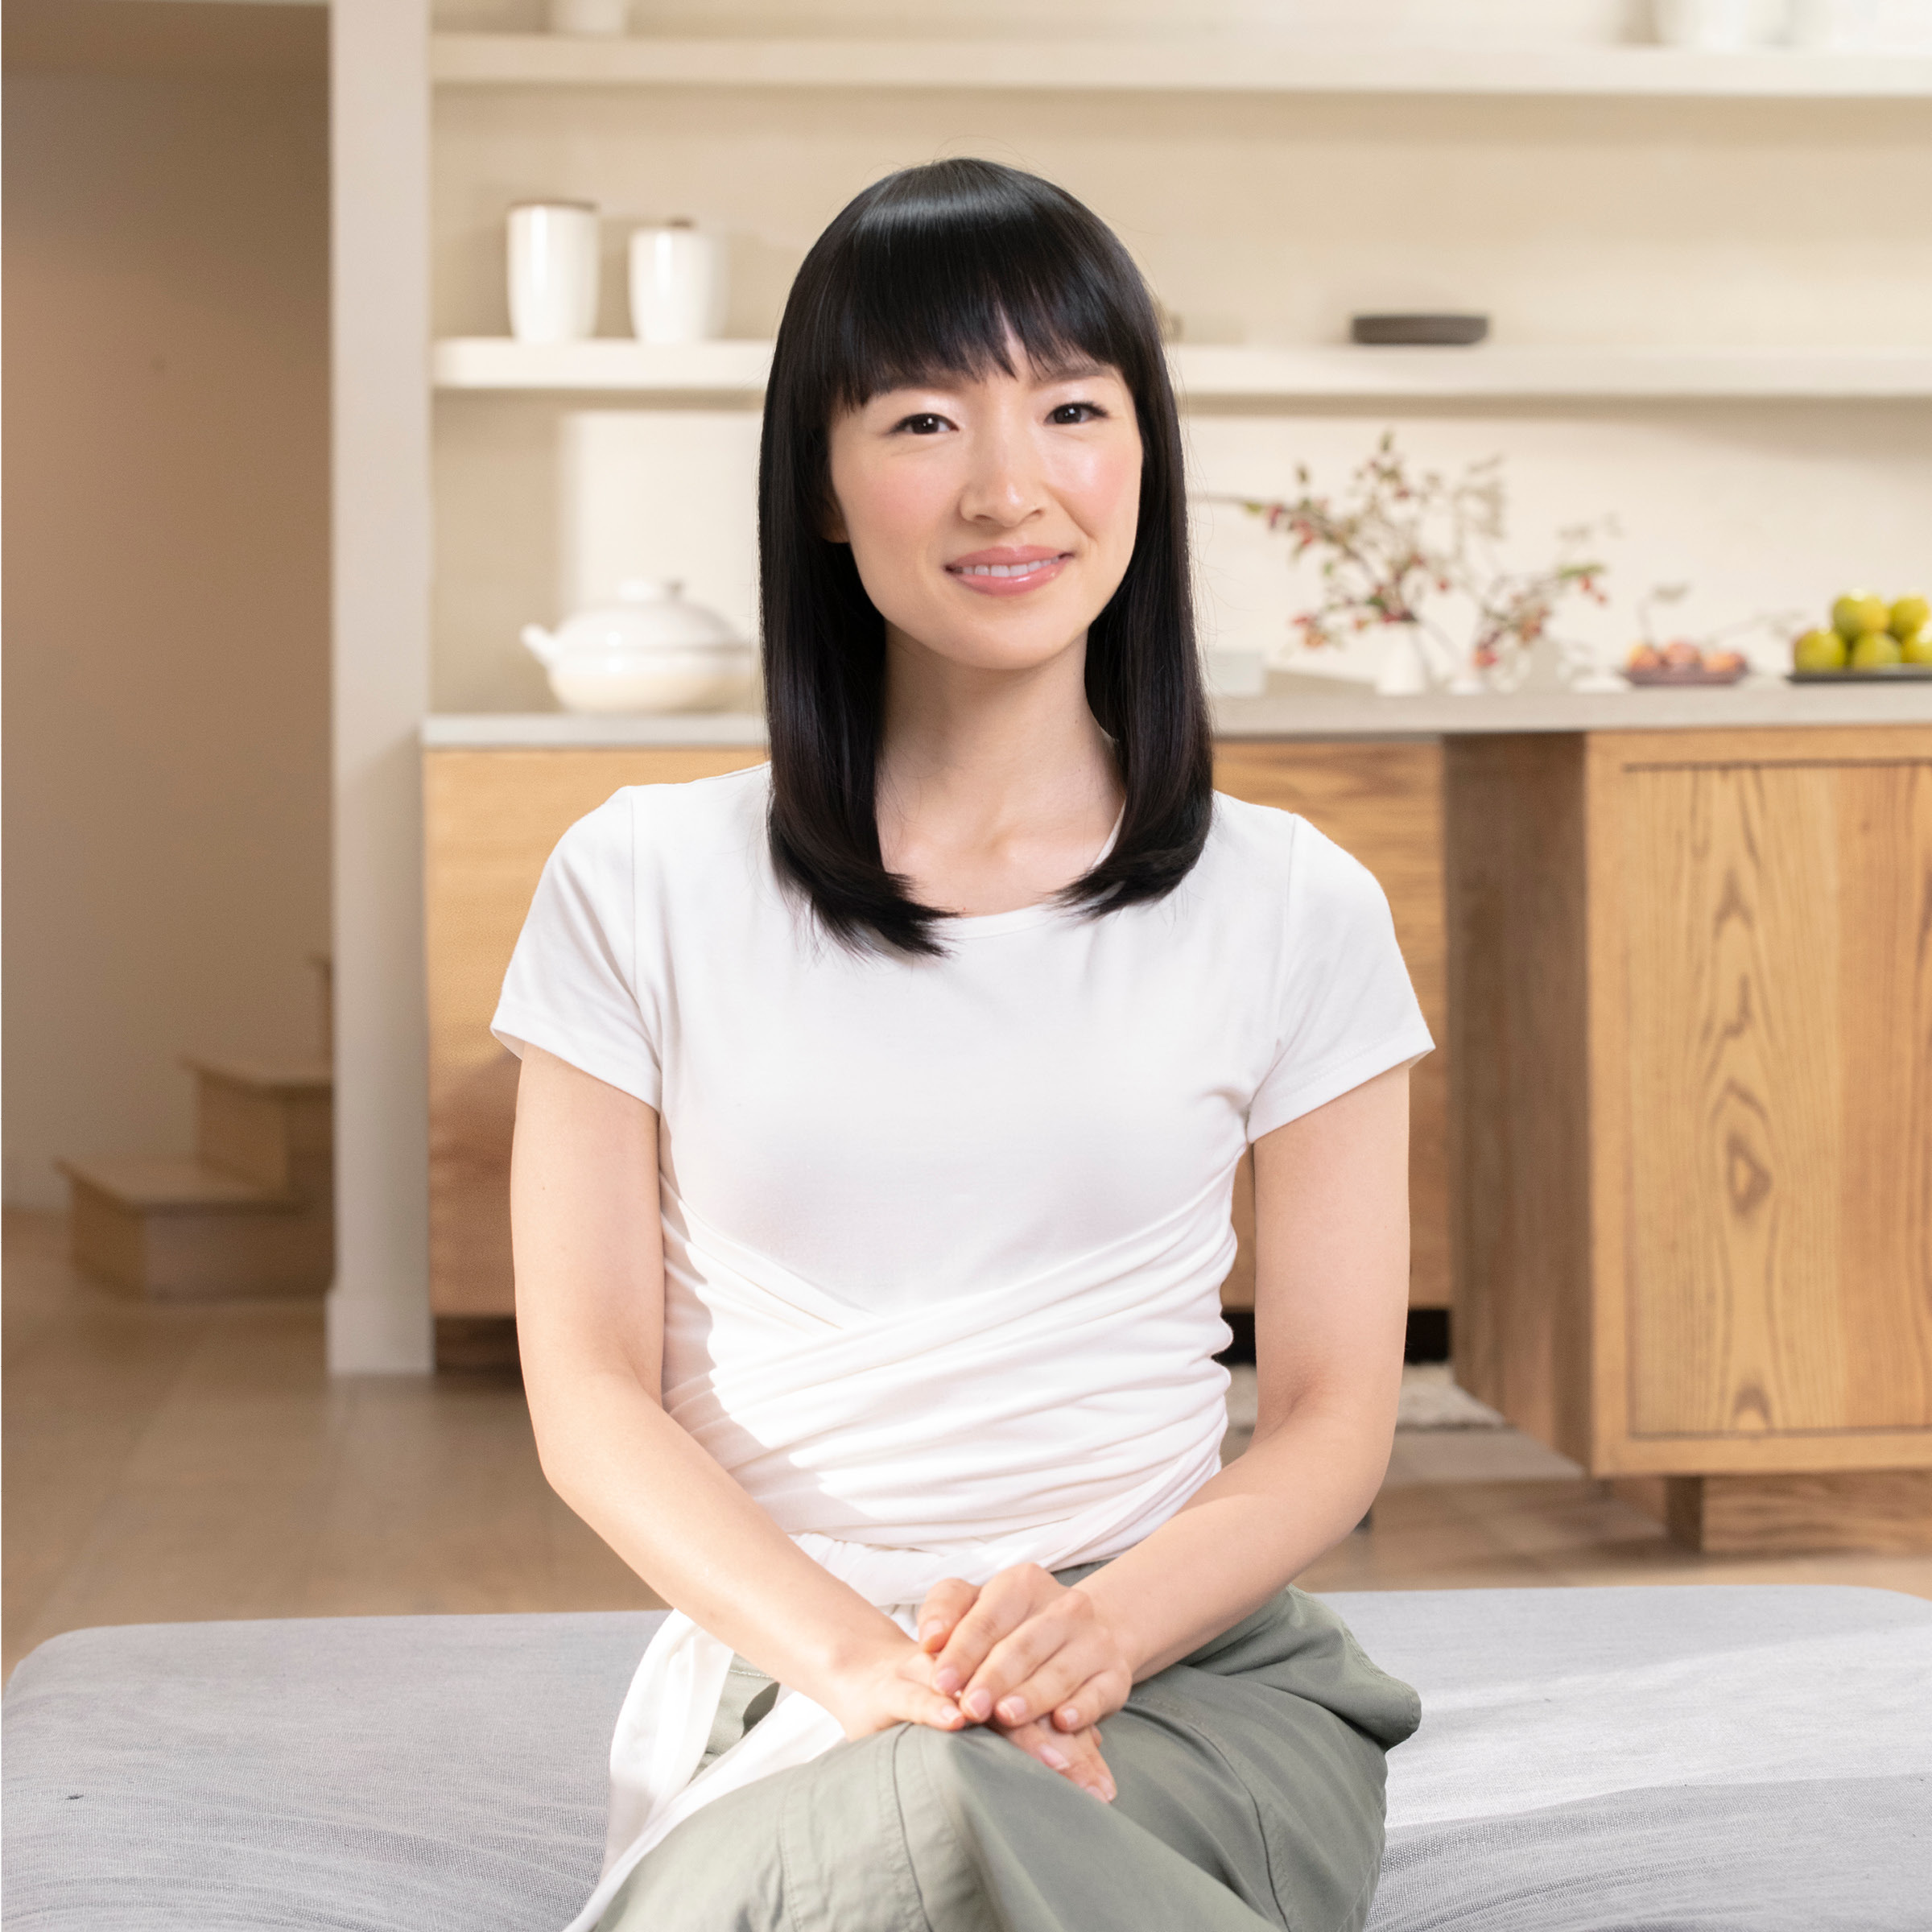 The Container Store to Launch Exclusive Product Line With Marie Kondo